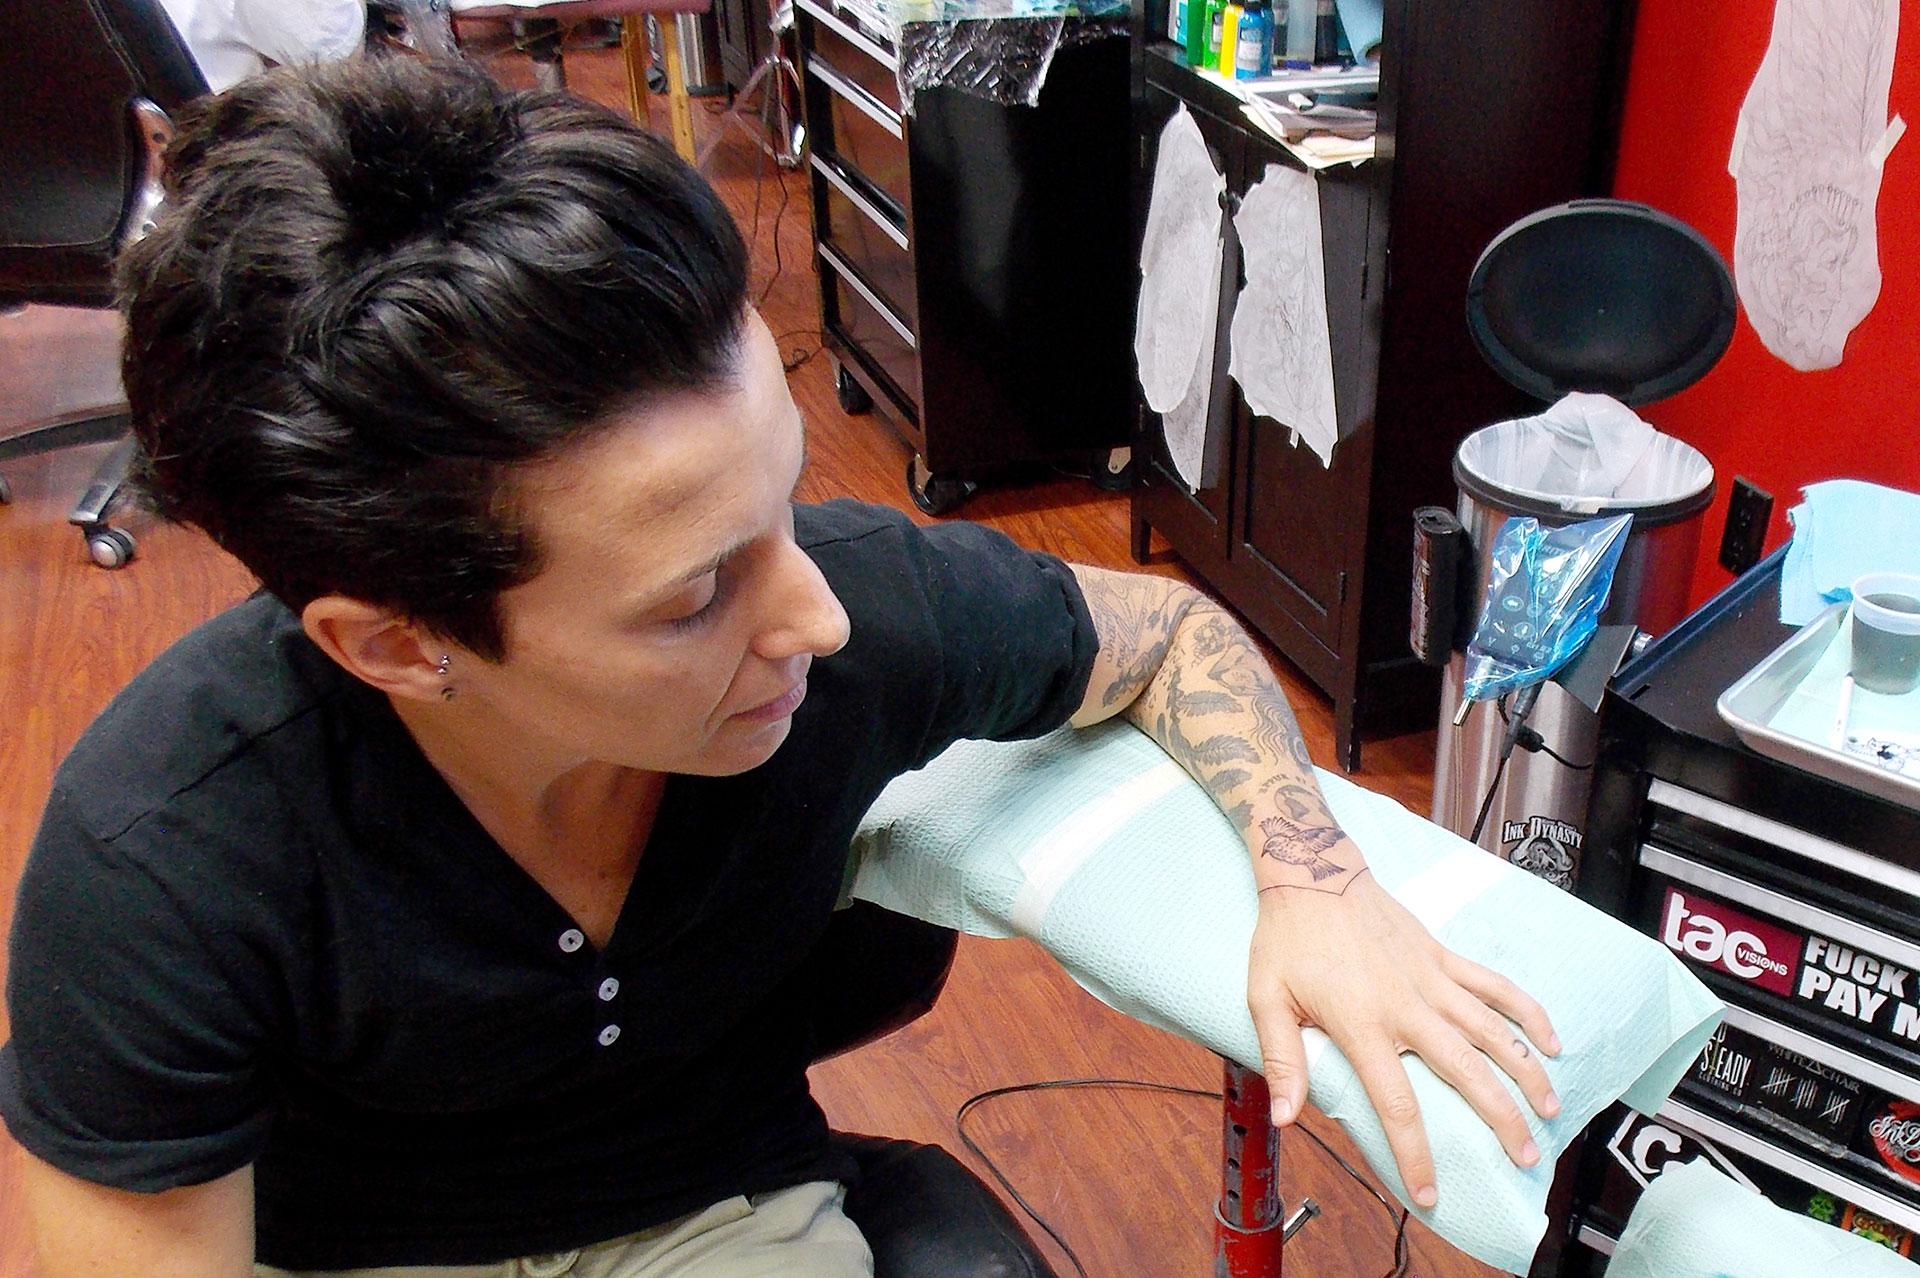 Renee Periat, CEO and founder of Androgynous Fox clothing line, examines the finalized version of her finch tattoo, created by Tattoo Artist Jake Schroeder on Oct. 11 at Keith Duggan’s Ink Dynasty. The tattoo took under half an hour altogether. The longest Schroeder has ever
spent tattooing in one sitting was about eight hours for a back piece.